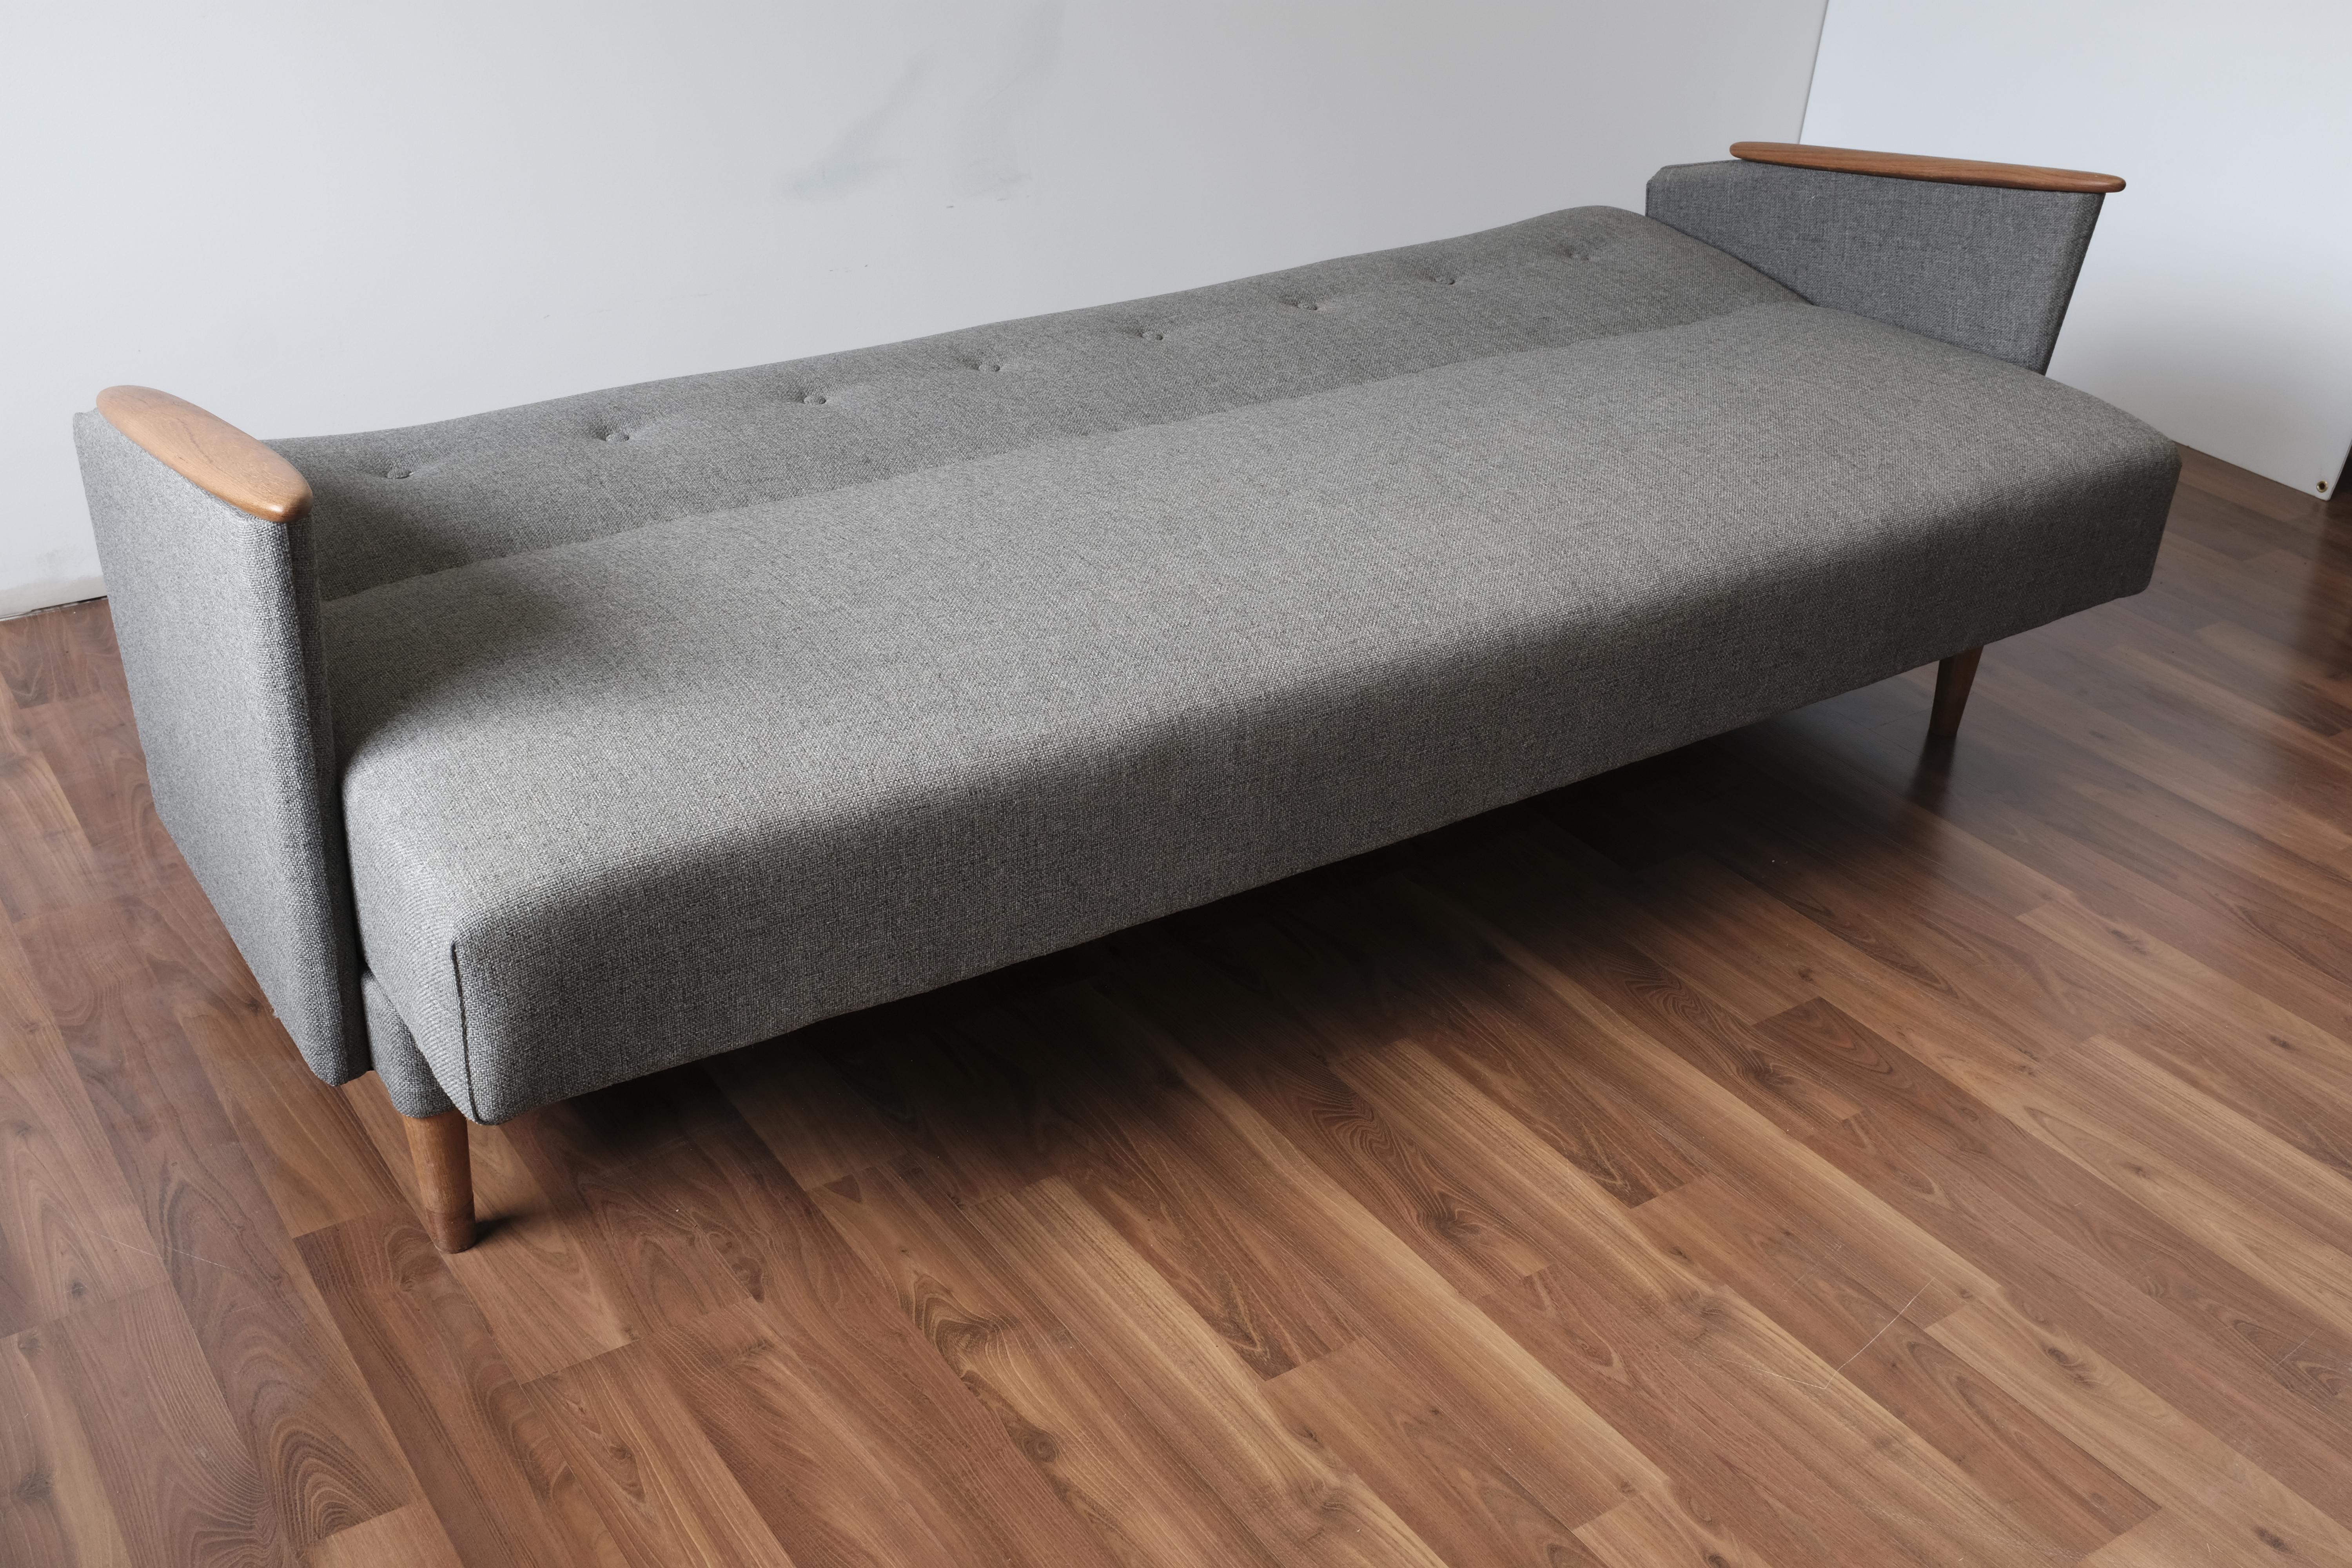 Sofa-bed or daybed with new grey upholstery and refinished teak armrests and legs. 

The mattress surface measures 73